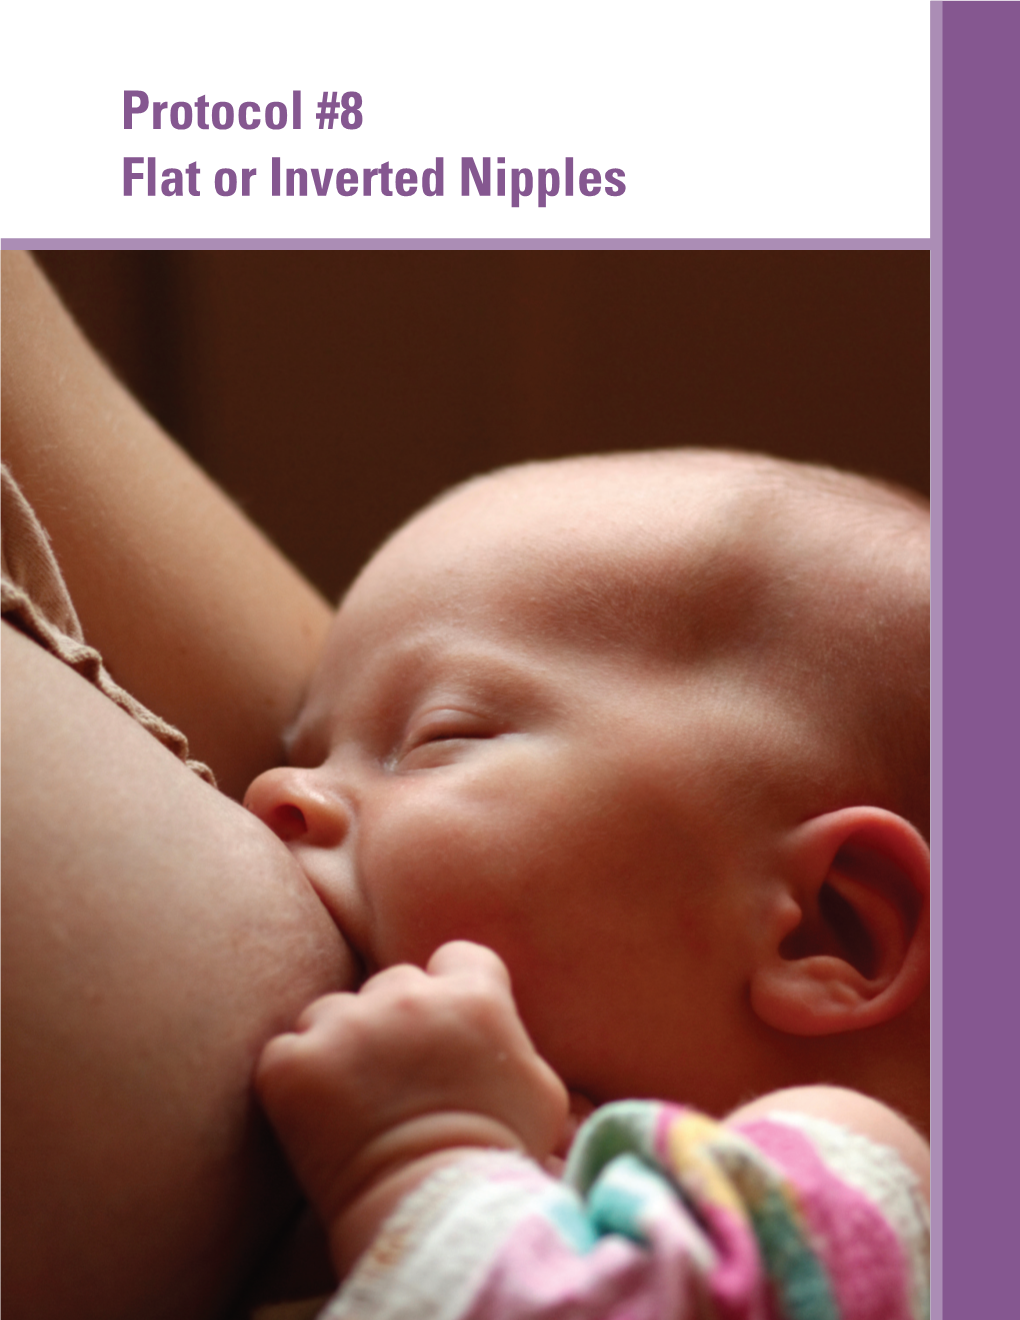 Protocol #8: Flat Or Inverted Nipples